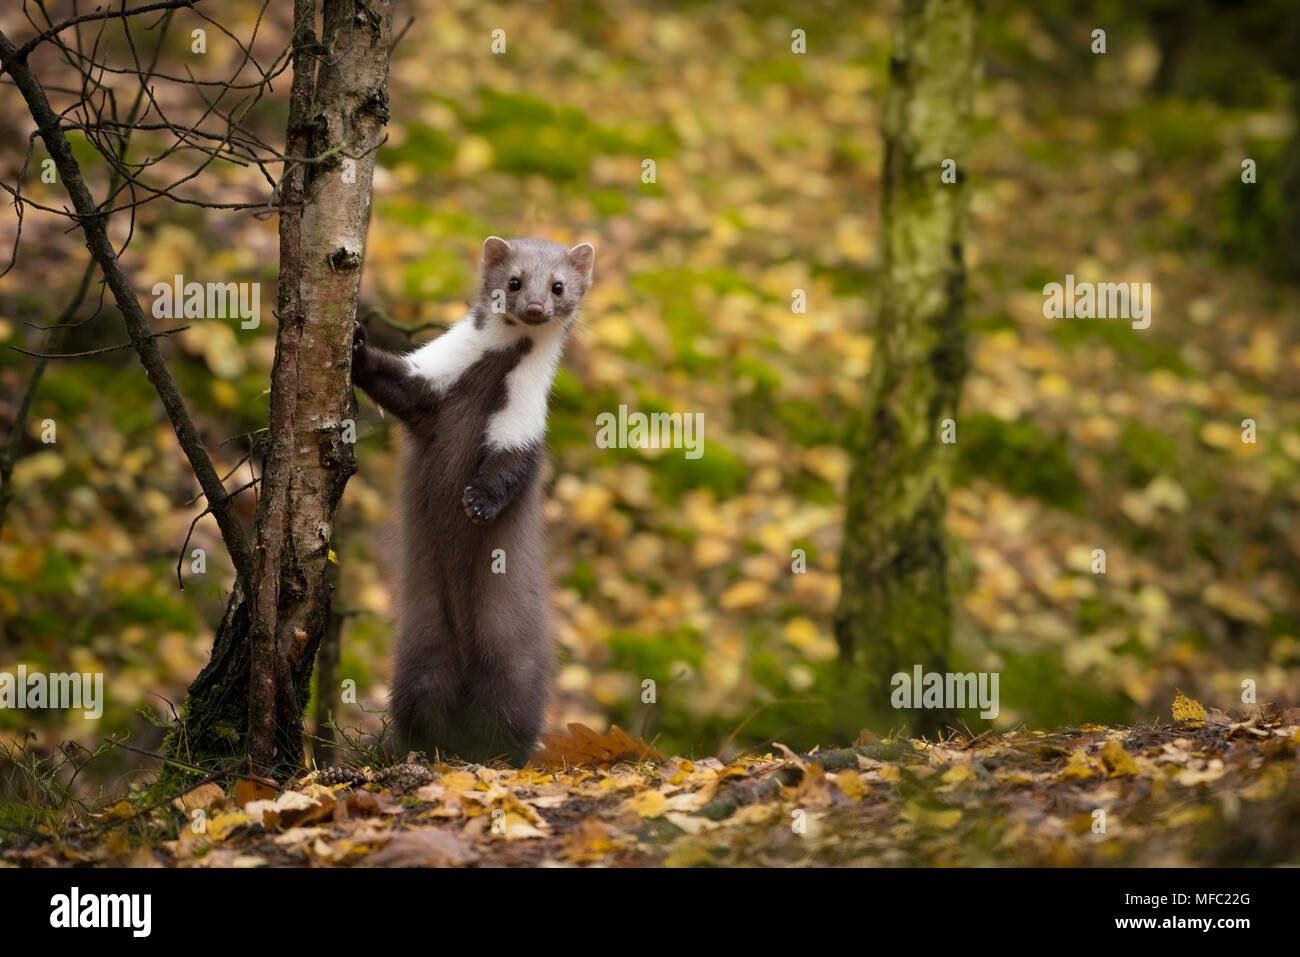 The beech marten looking directly on camera / Cute animals / martes foina / marten in autumn Stock Photo